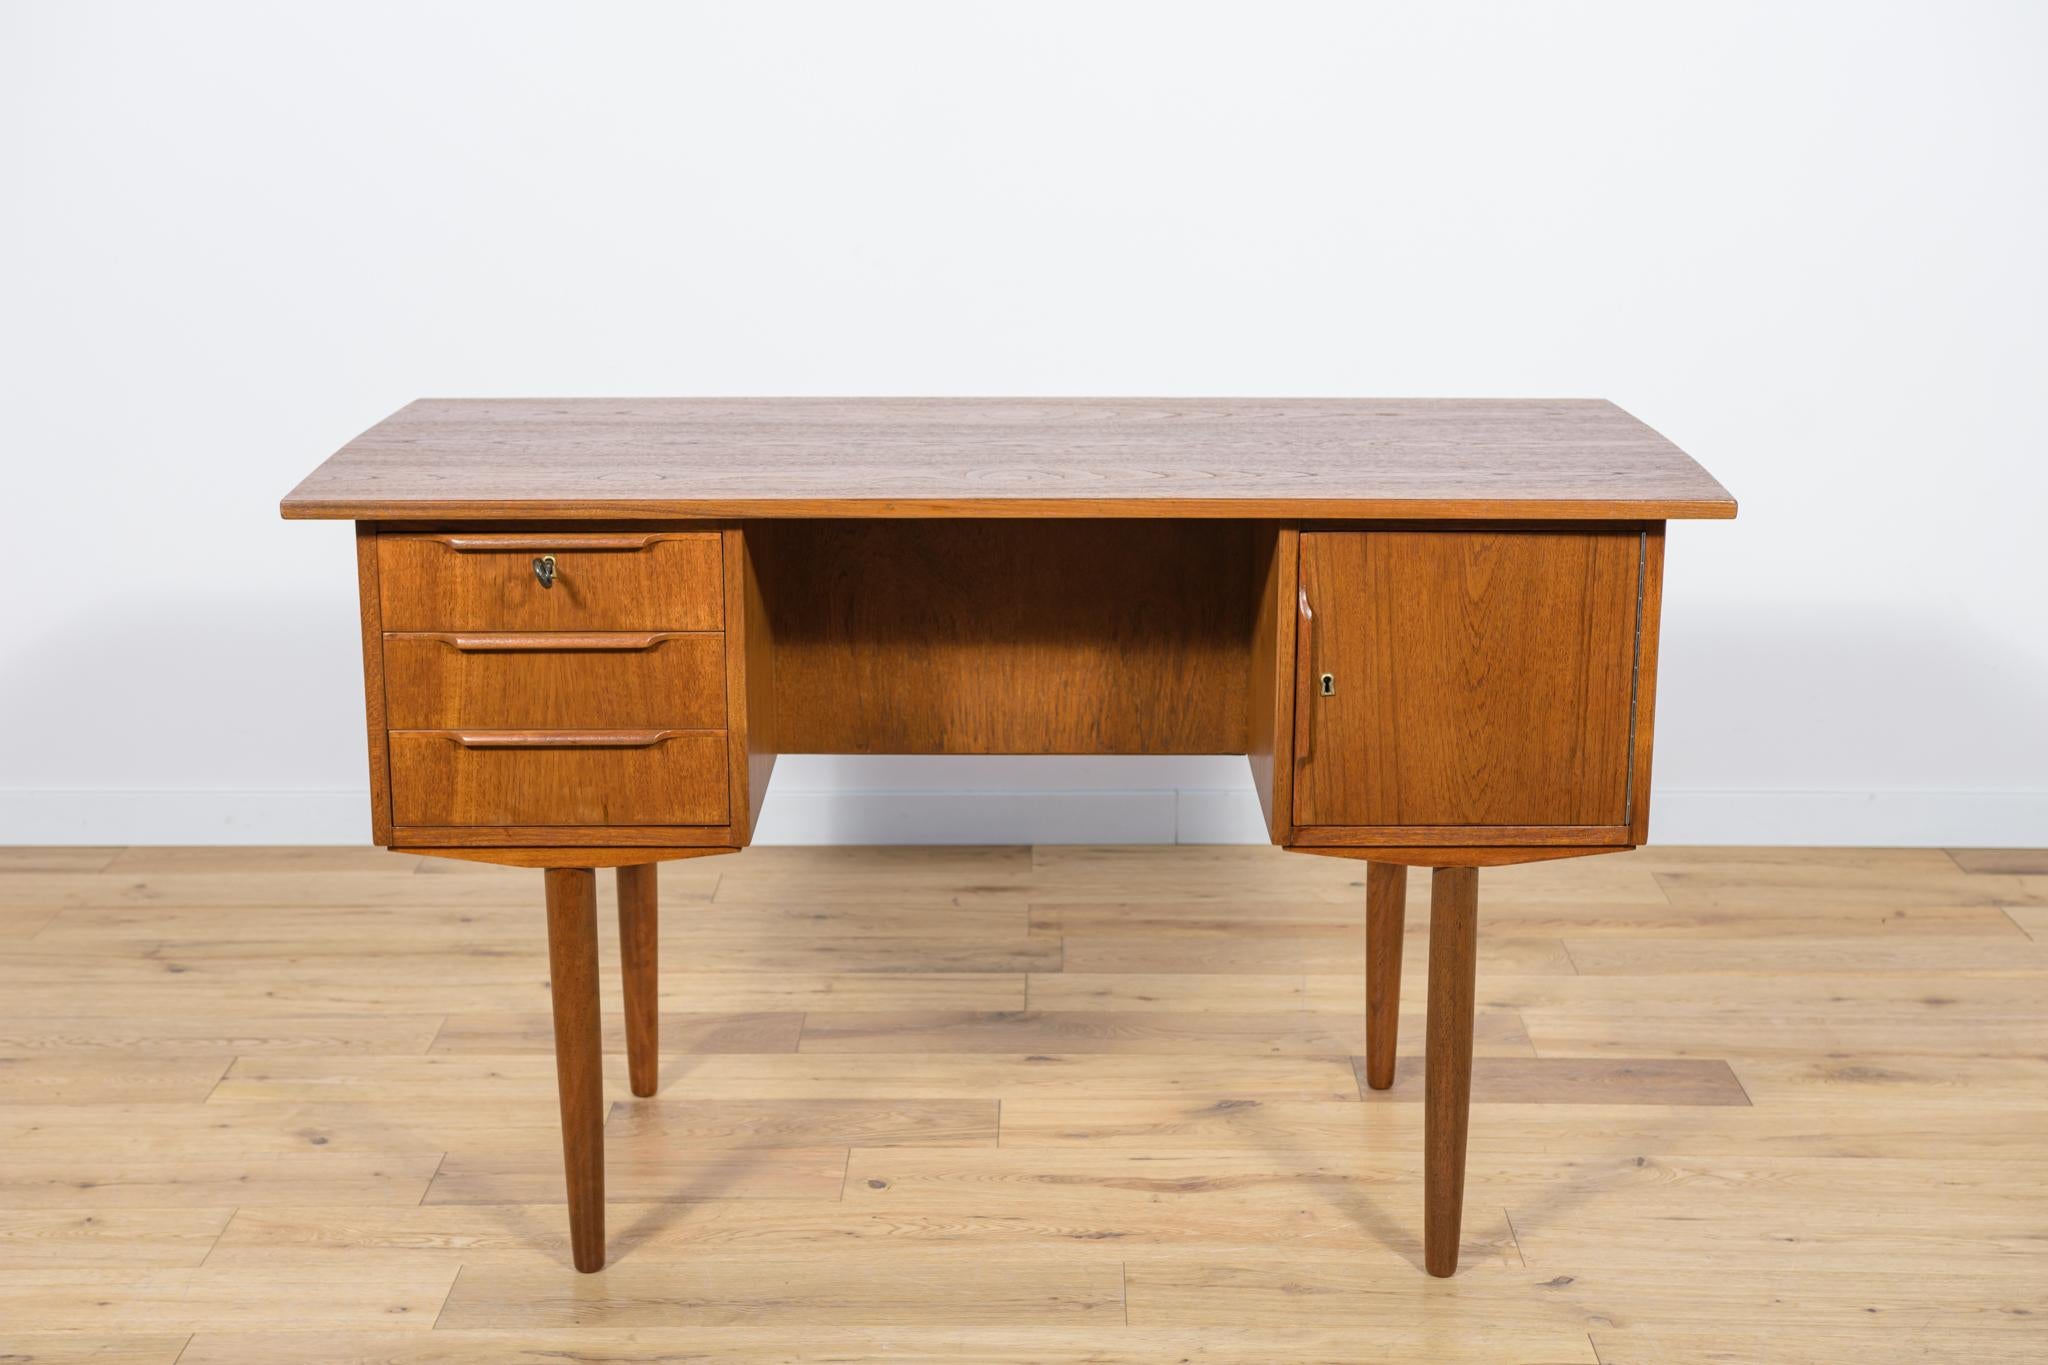 This desk was made in Denmark in the 1960s. It was made of teak wood with contoured handles. It consists of two modules, on the left there are three drawers, on the right there is a lockable cabinet with shelves. There is a bookshelf in the back.